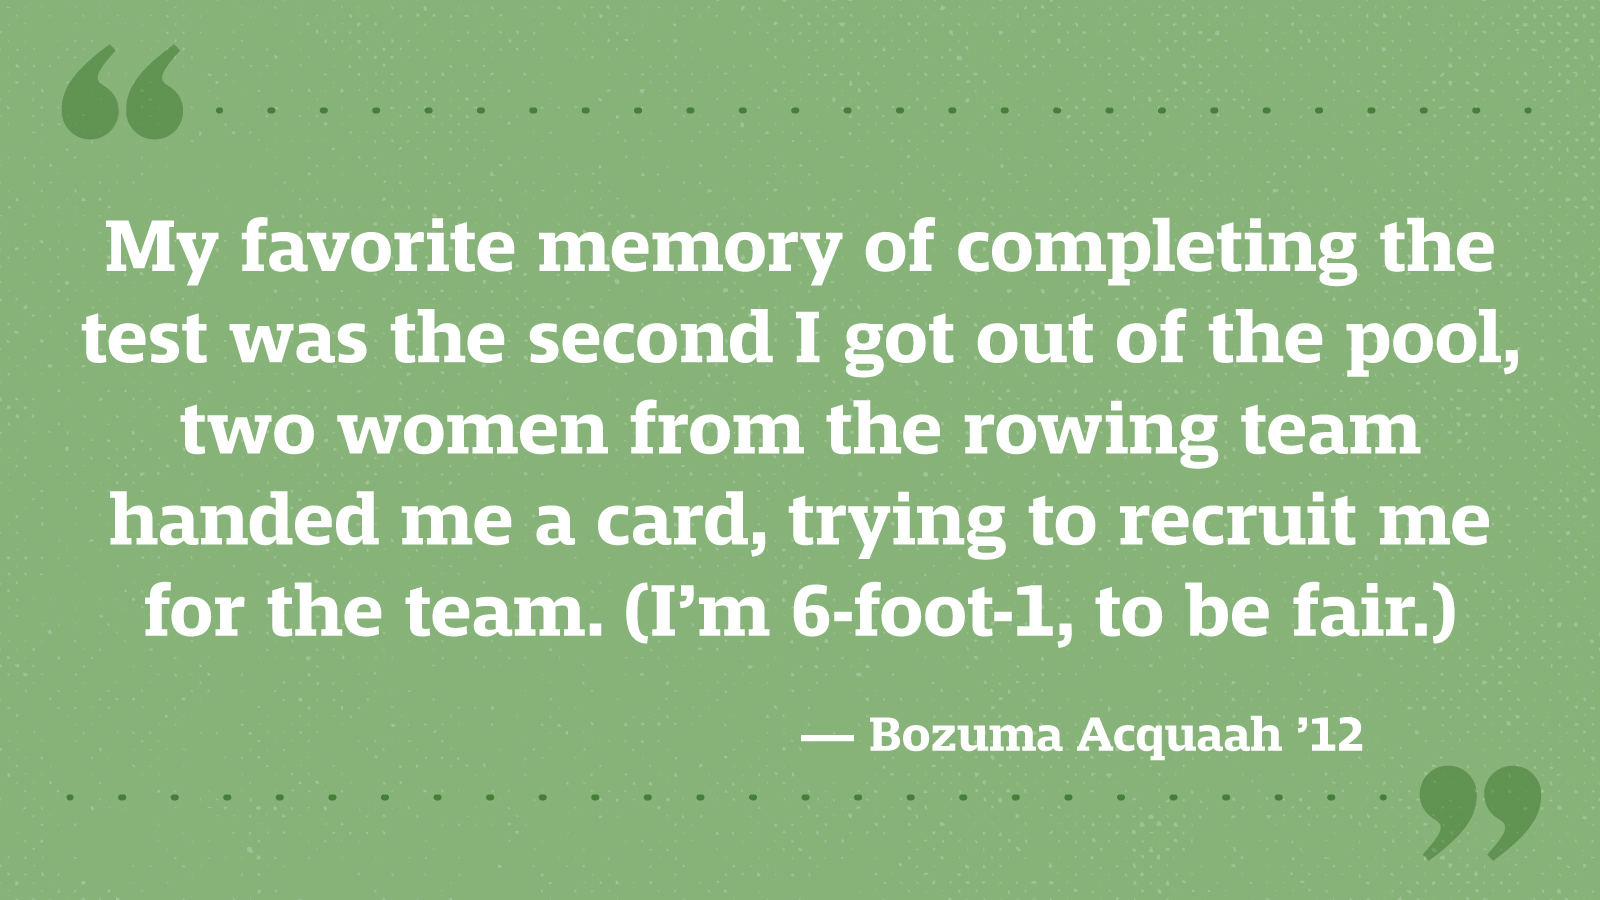 My favorite memory of completing the test was the second I got out of the pool, two women from the rowing team handed me a card, trying to recruit me for the team. (I’m 6-foot-1, to be fair.) — Bozuma Acquaah ’12